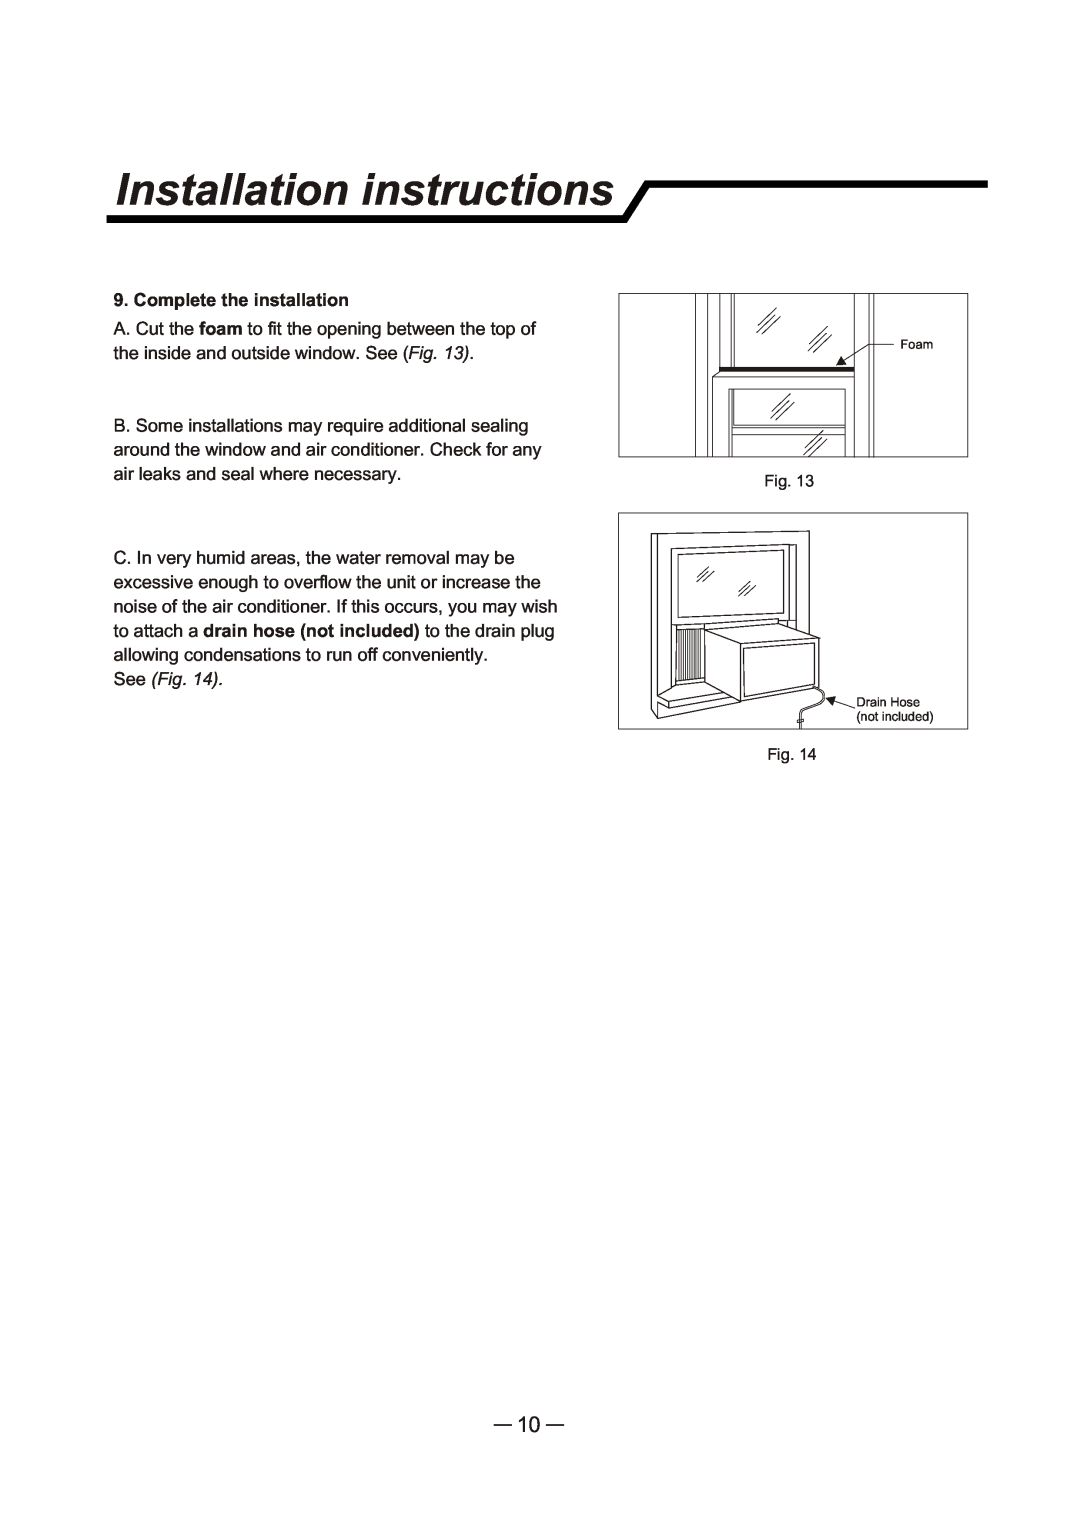 Sunbeam SCA103RWB1 user manual Installation instructions, Complete the installation, Foam, Drain Hose not included 